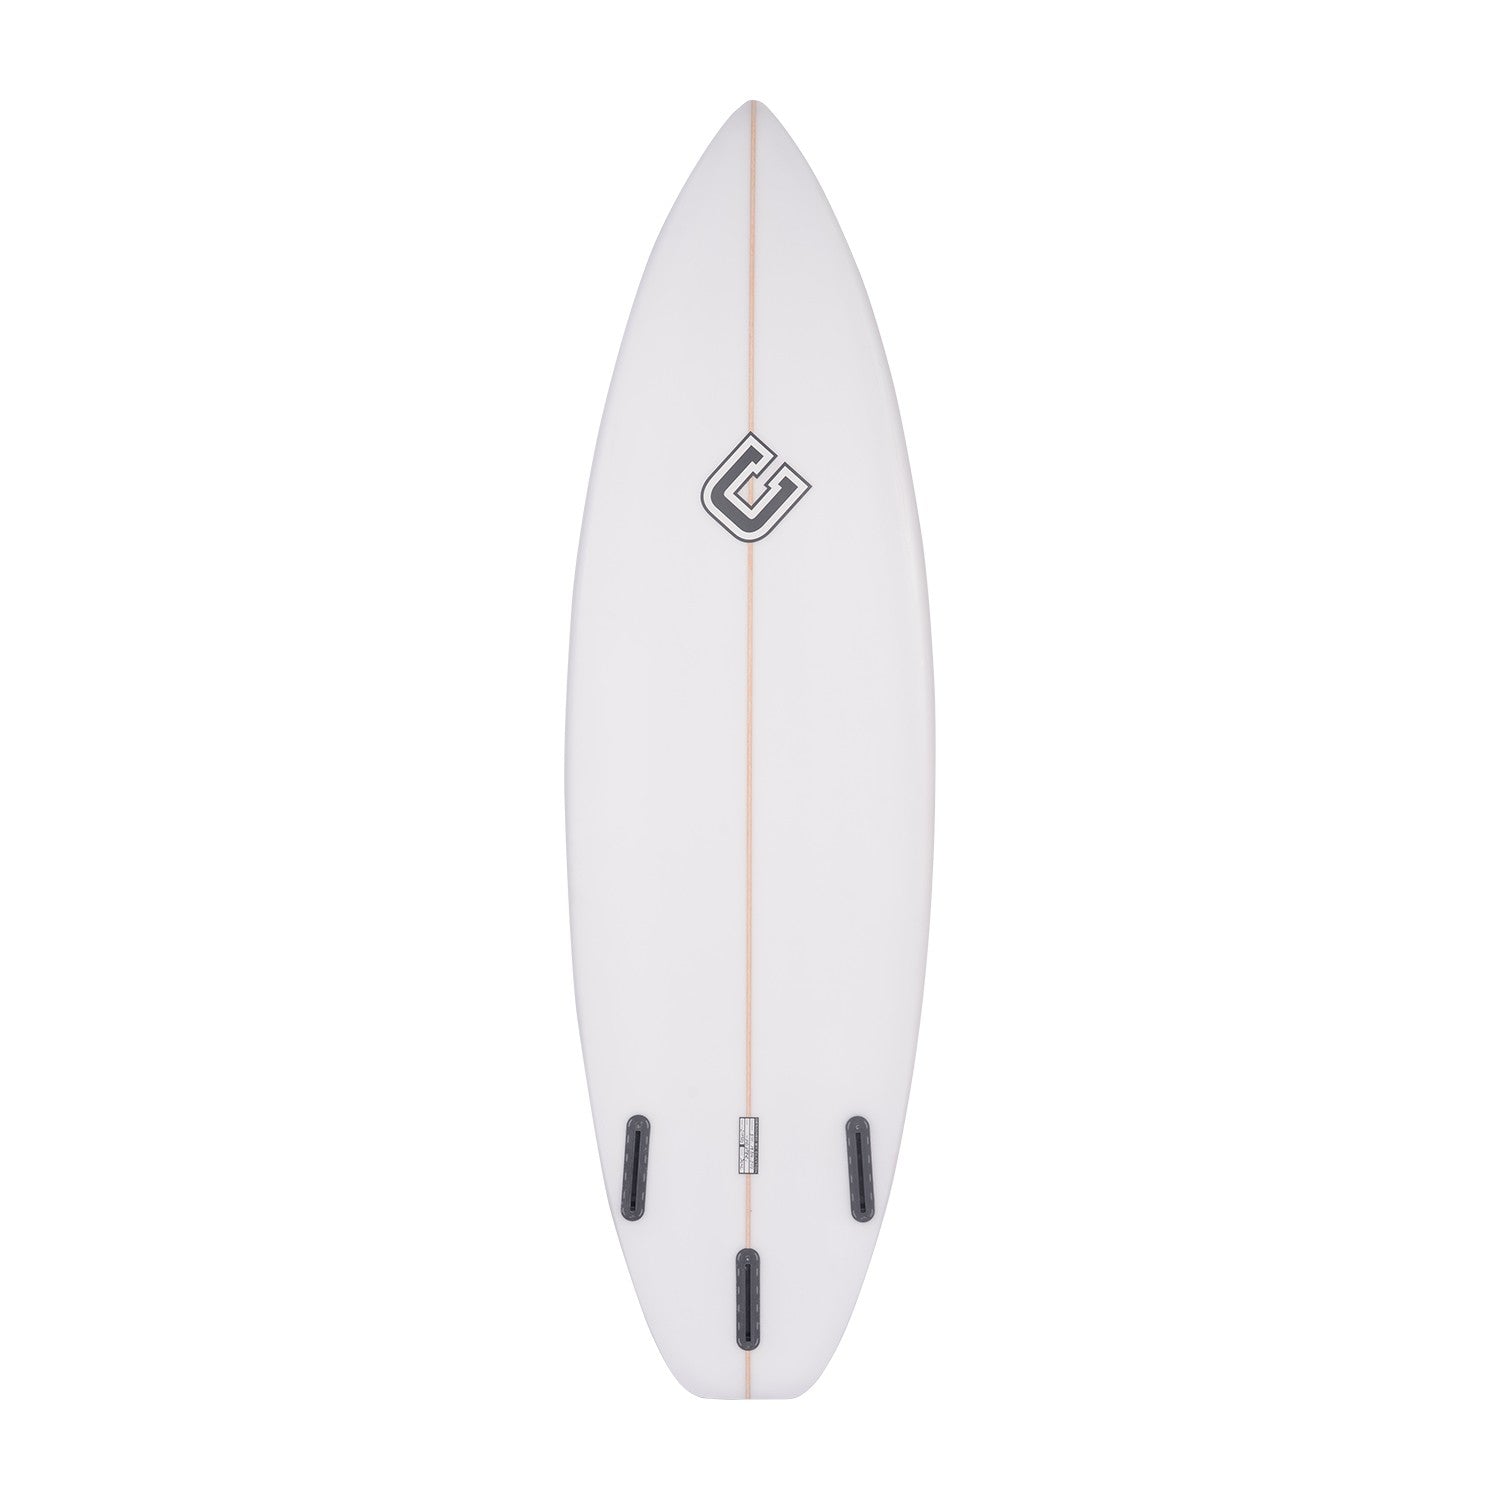 CLAYTON Surfboards - Trickster (PU) Futures - 5'10